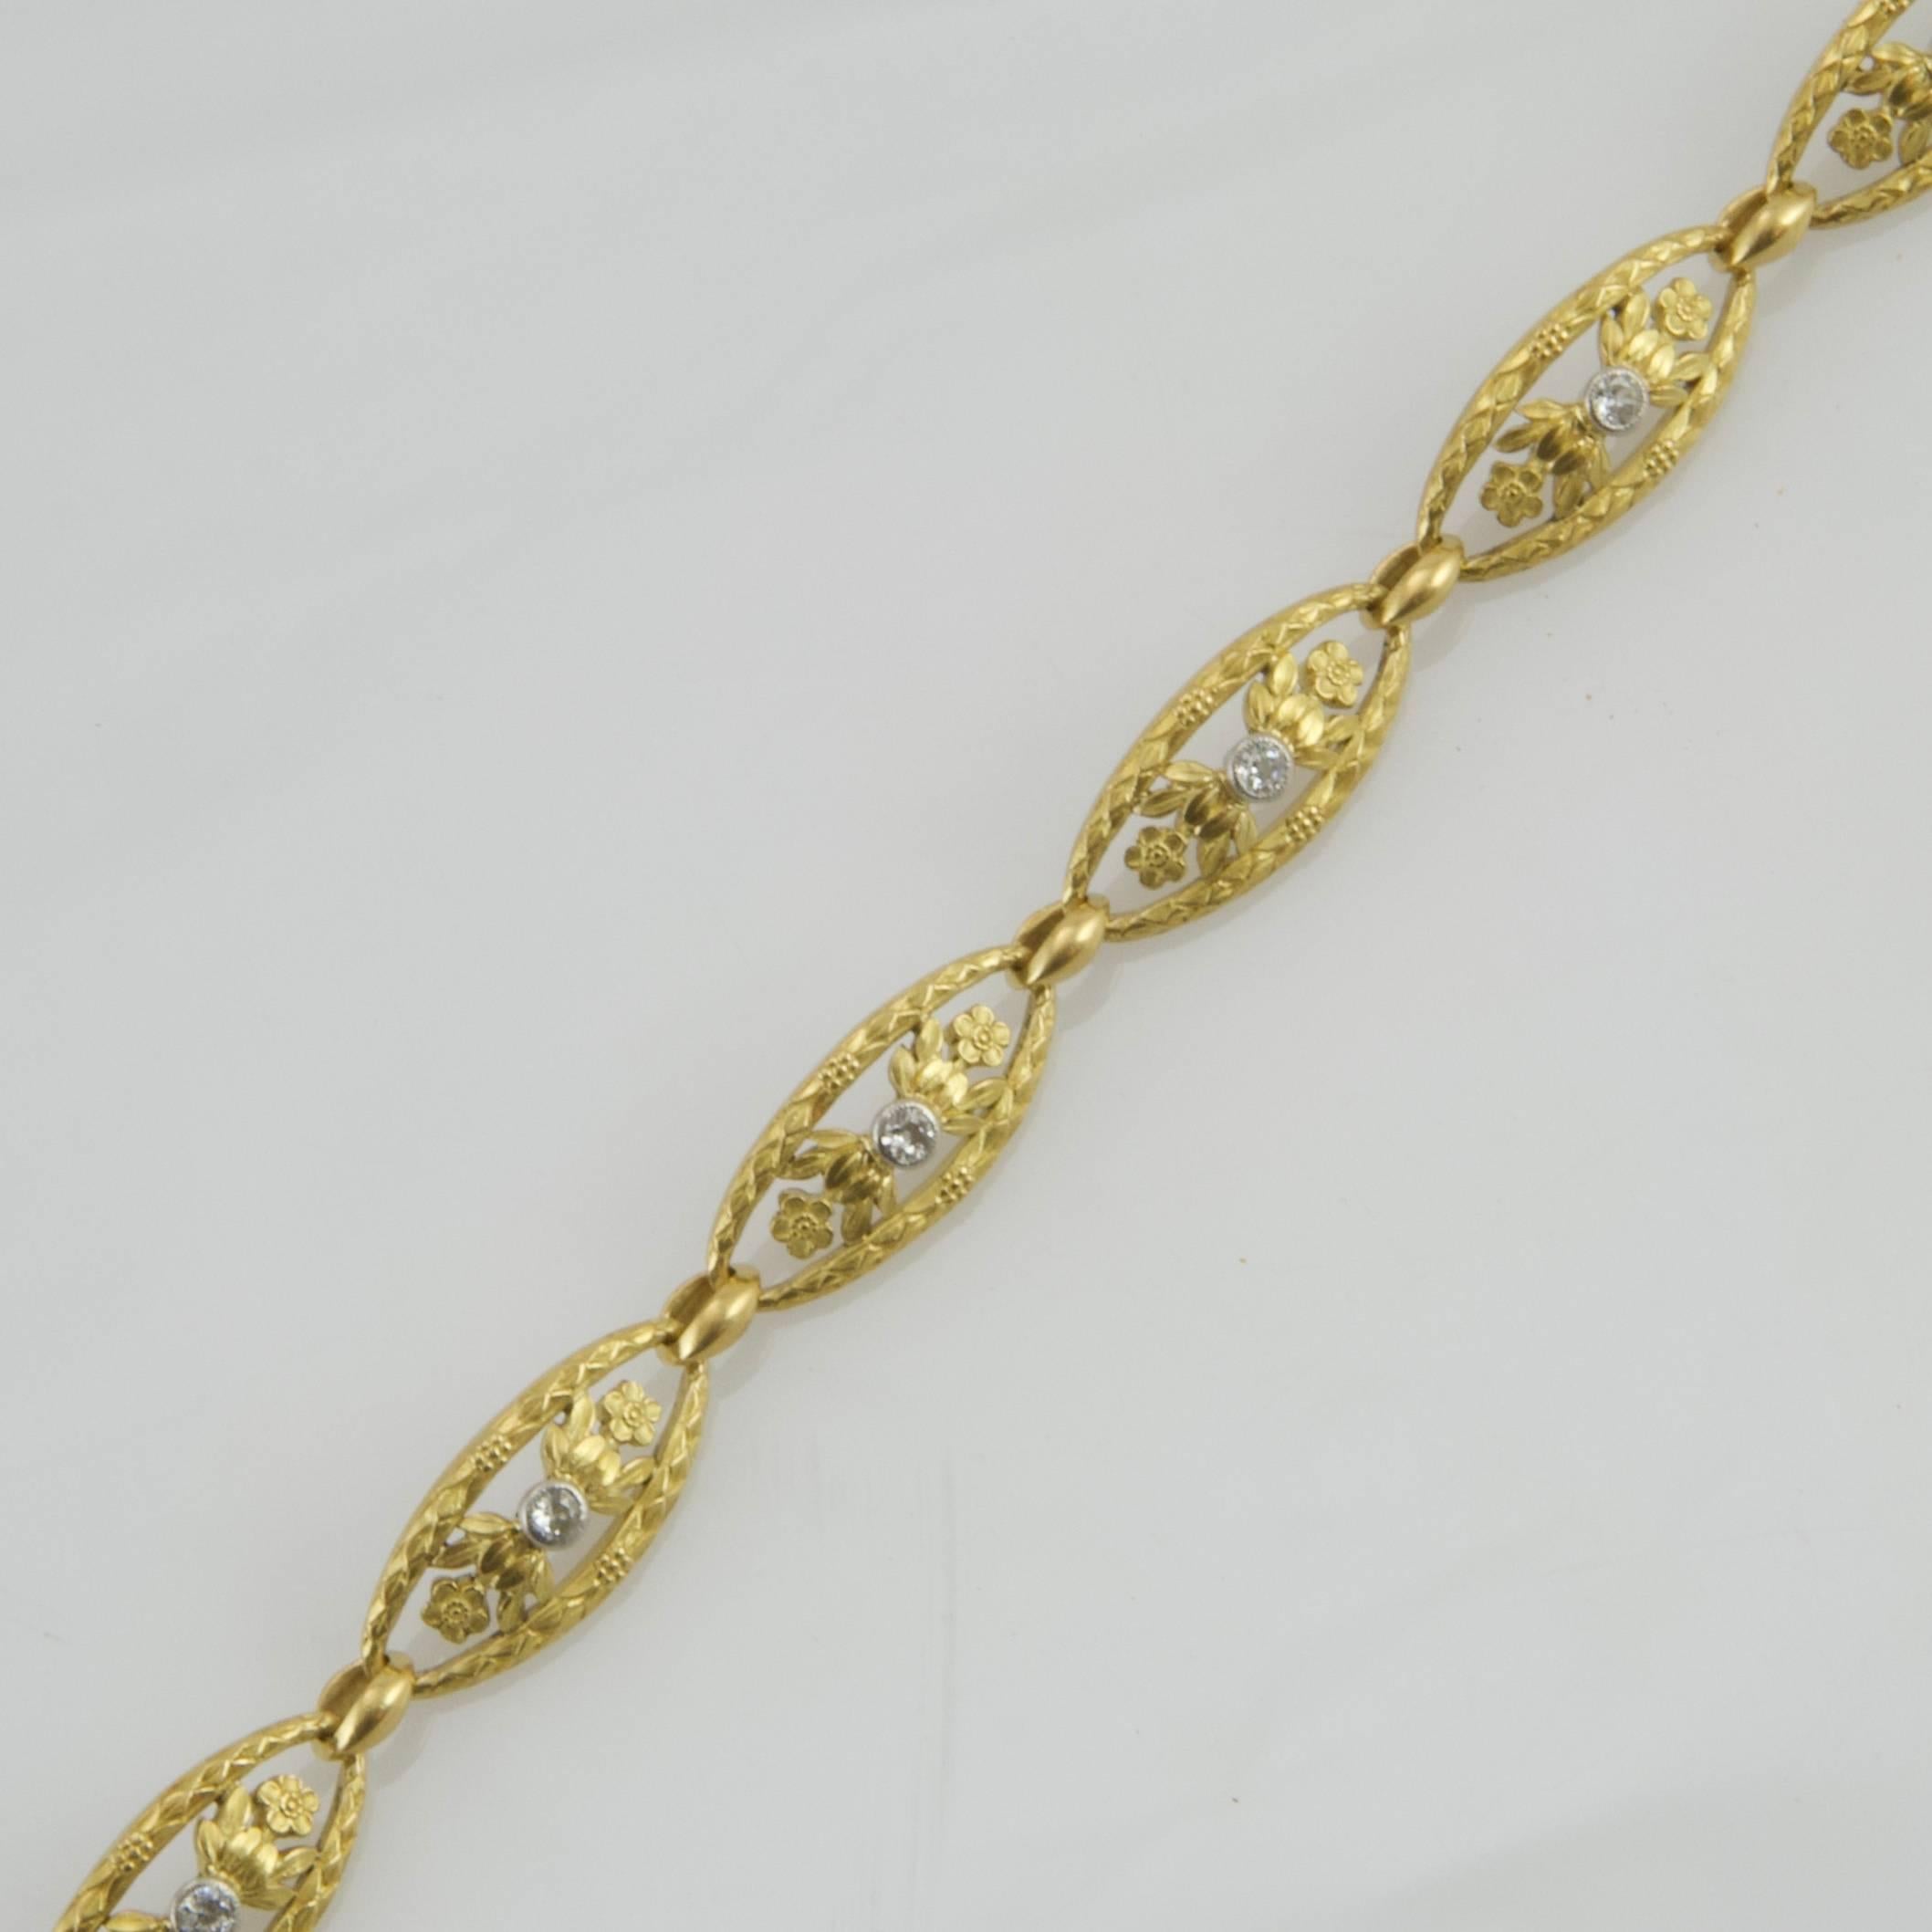 Open weave yellow gold bracelet, composed by eight chiseled links flower patterned. Each link of elongated form set with a antique-cut diamond ( approx: 0.10ct)
Made in France around 1900. 
Maker's mark:  Maître LG. Unknown. 
French assay mark. 
 